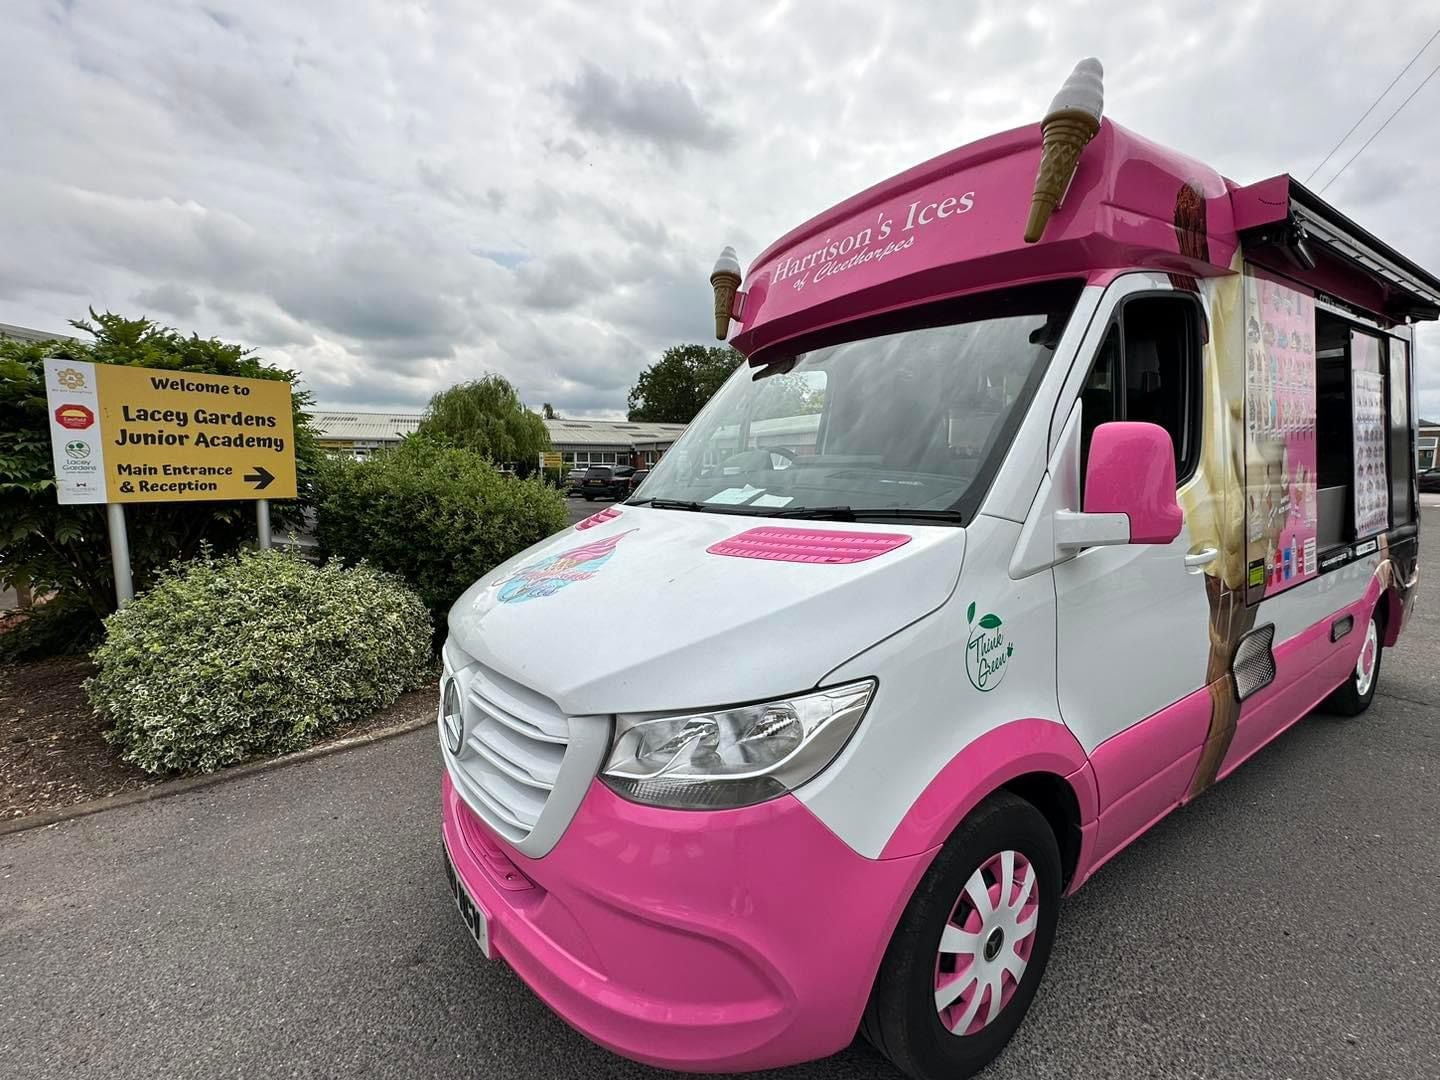 The ice cream van firm is being threatened with a court hearing for sounding its distinctive jingles too loud